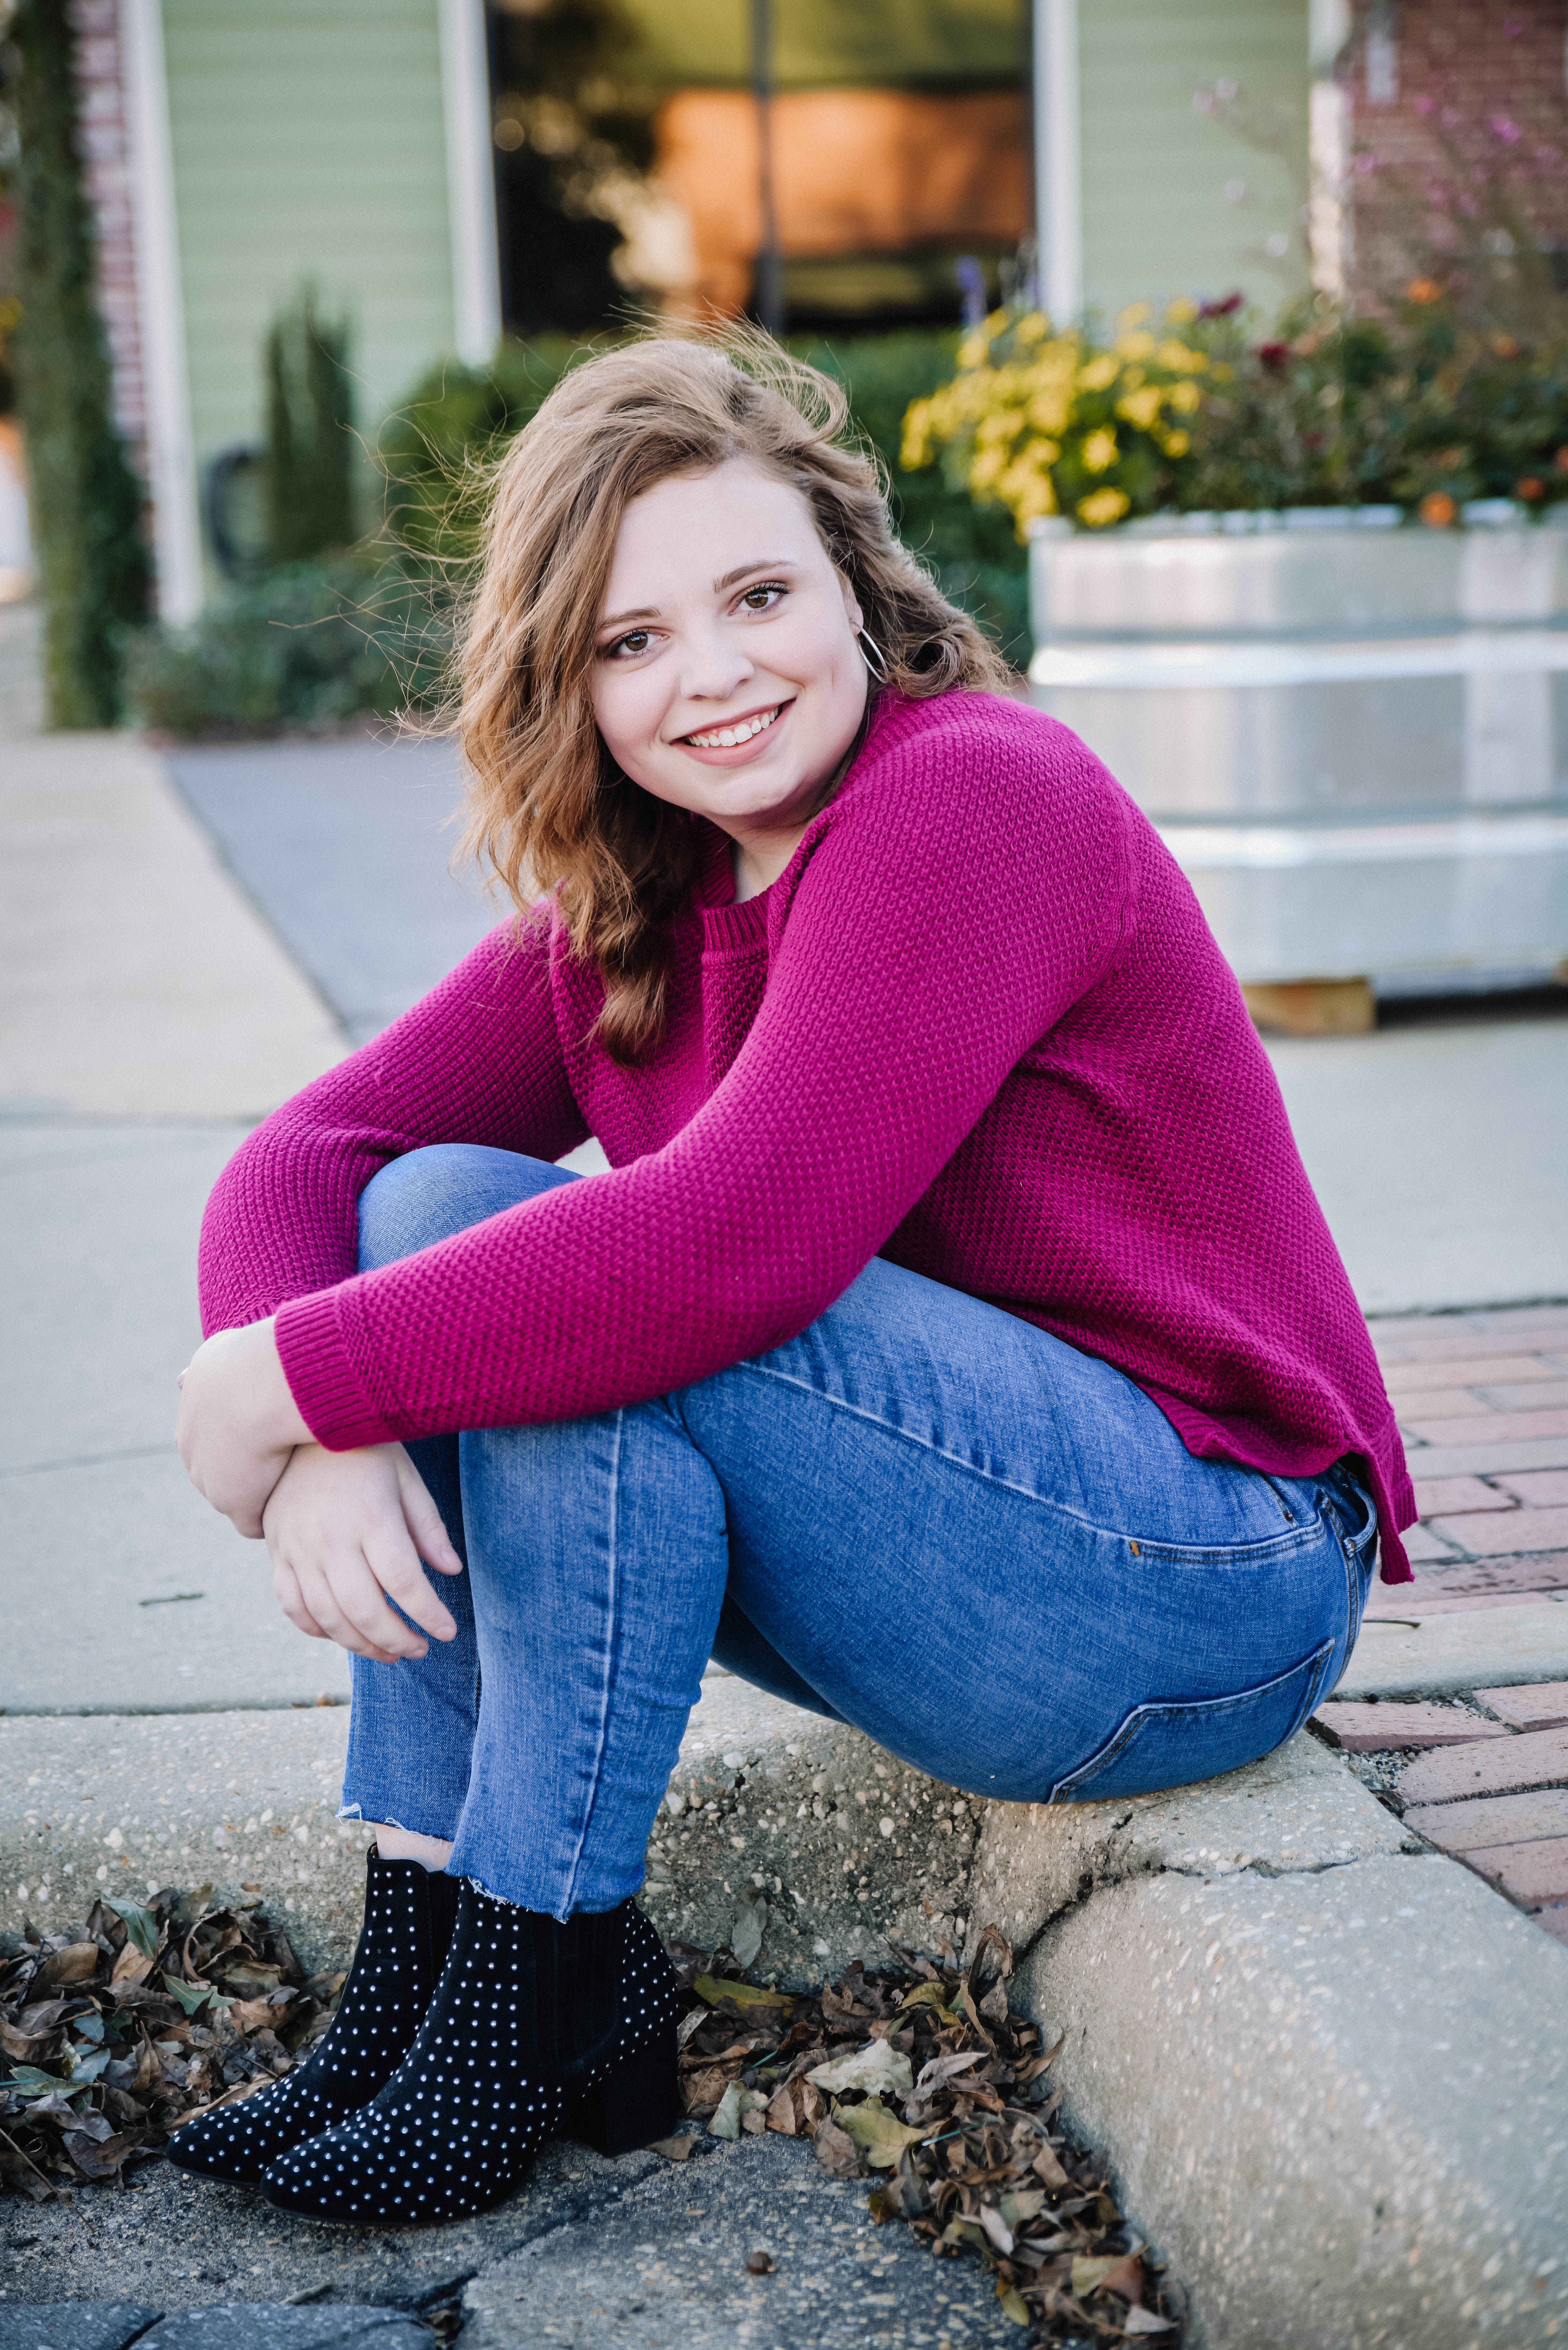 High school senior sitting on a curb in downtown located in Crestview, Florida.